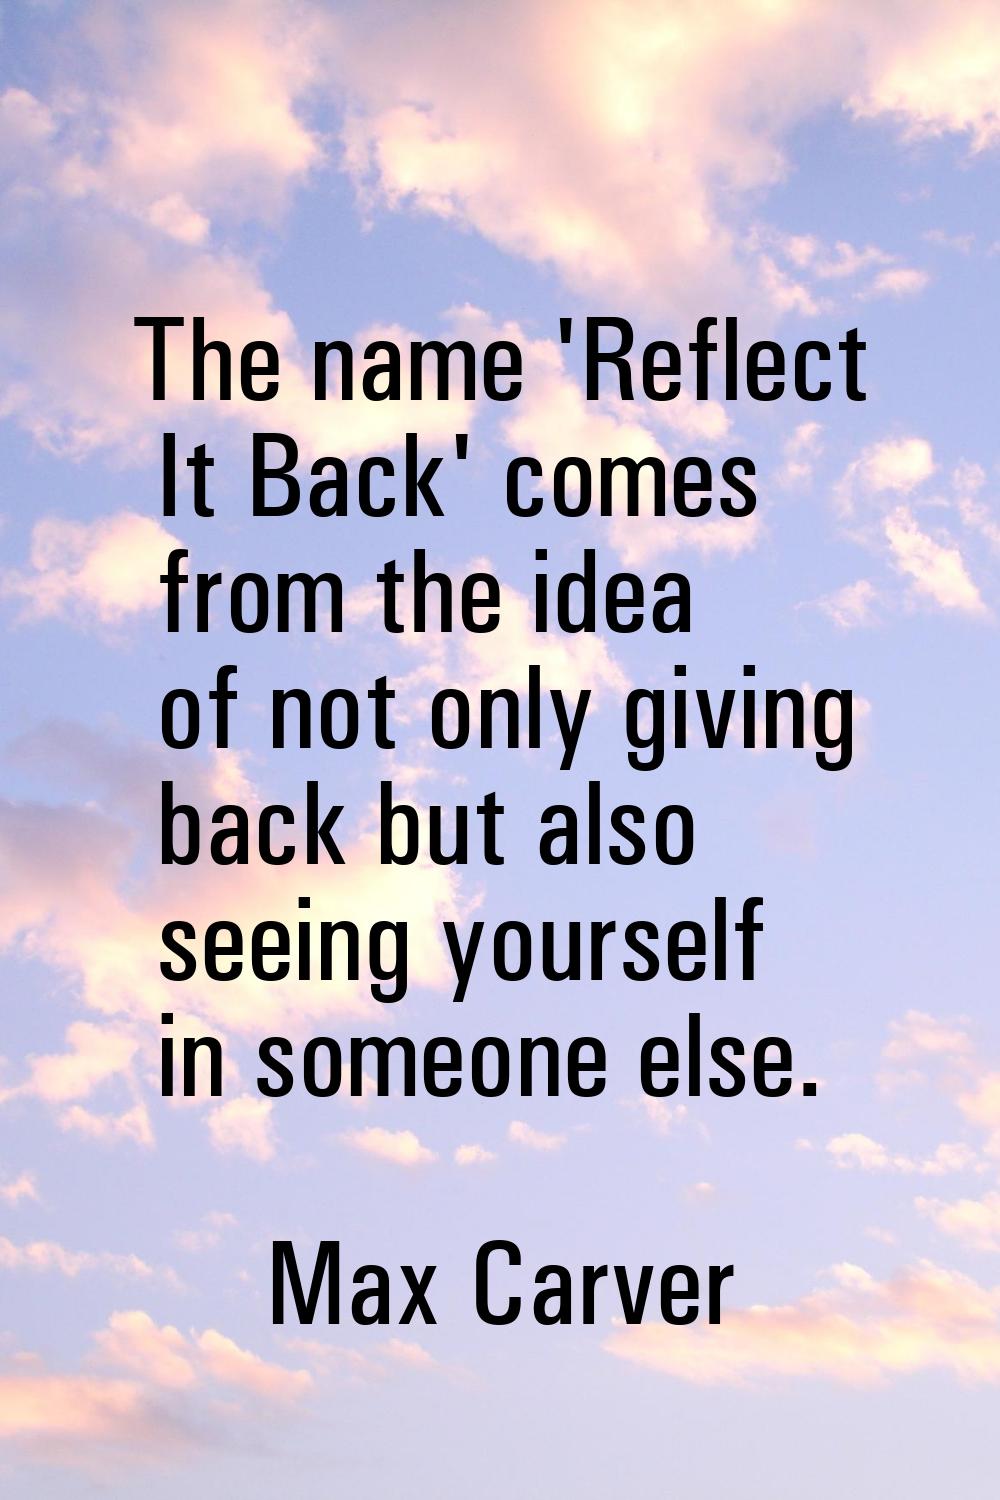 The name 'Reflect It Back' comes from the idea of not only giving back but also seeing yourself in 